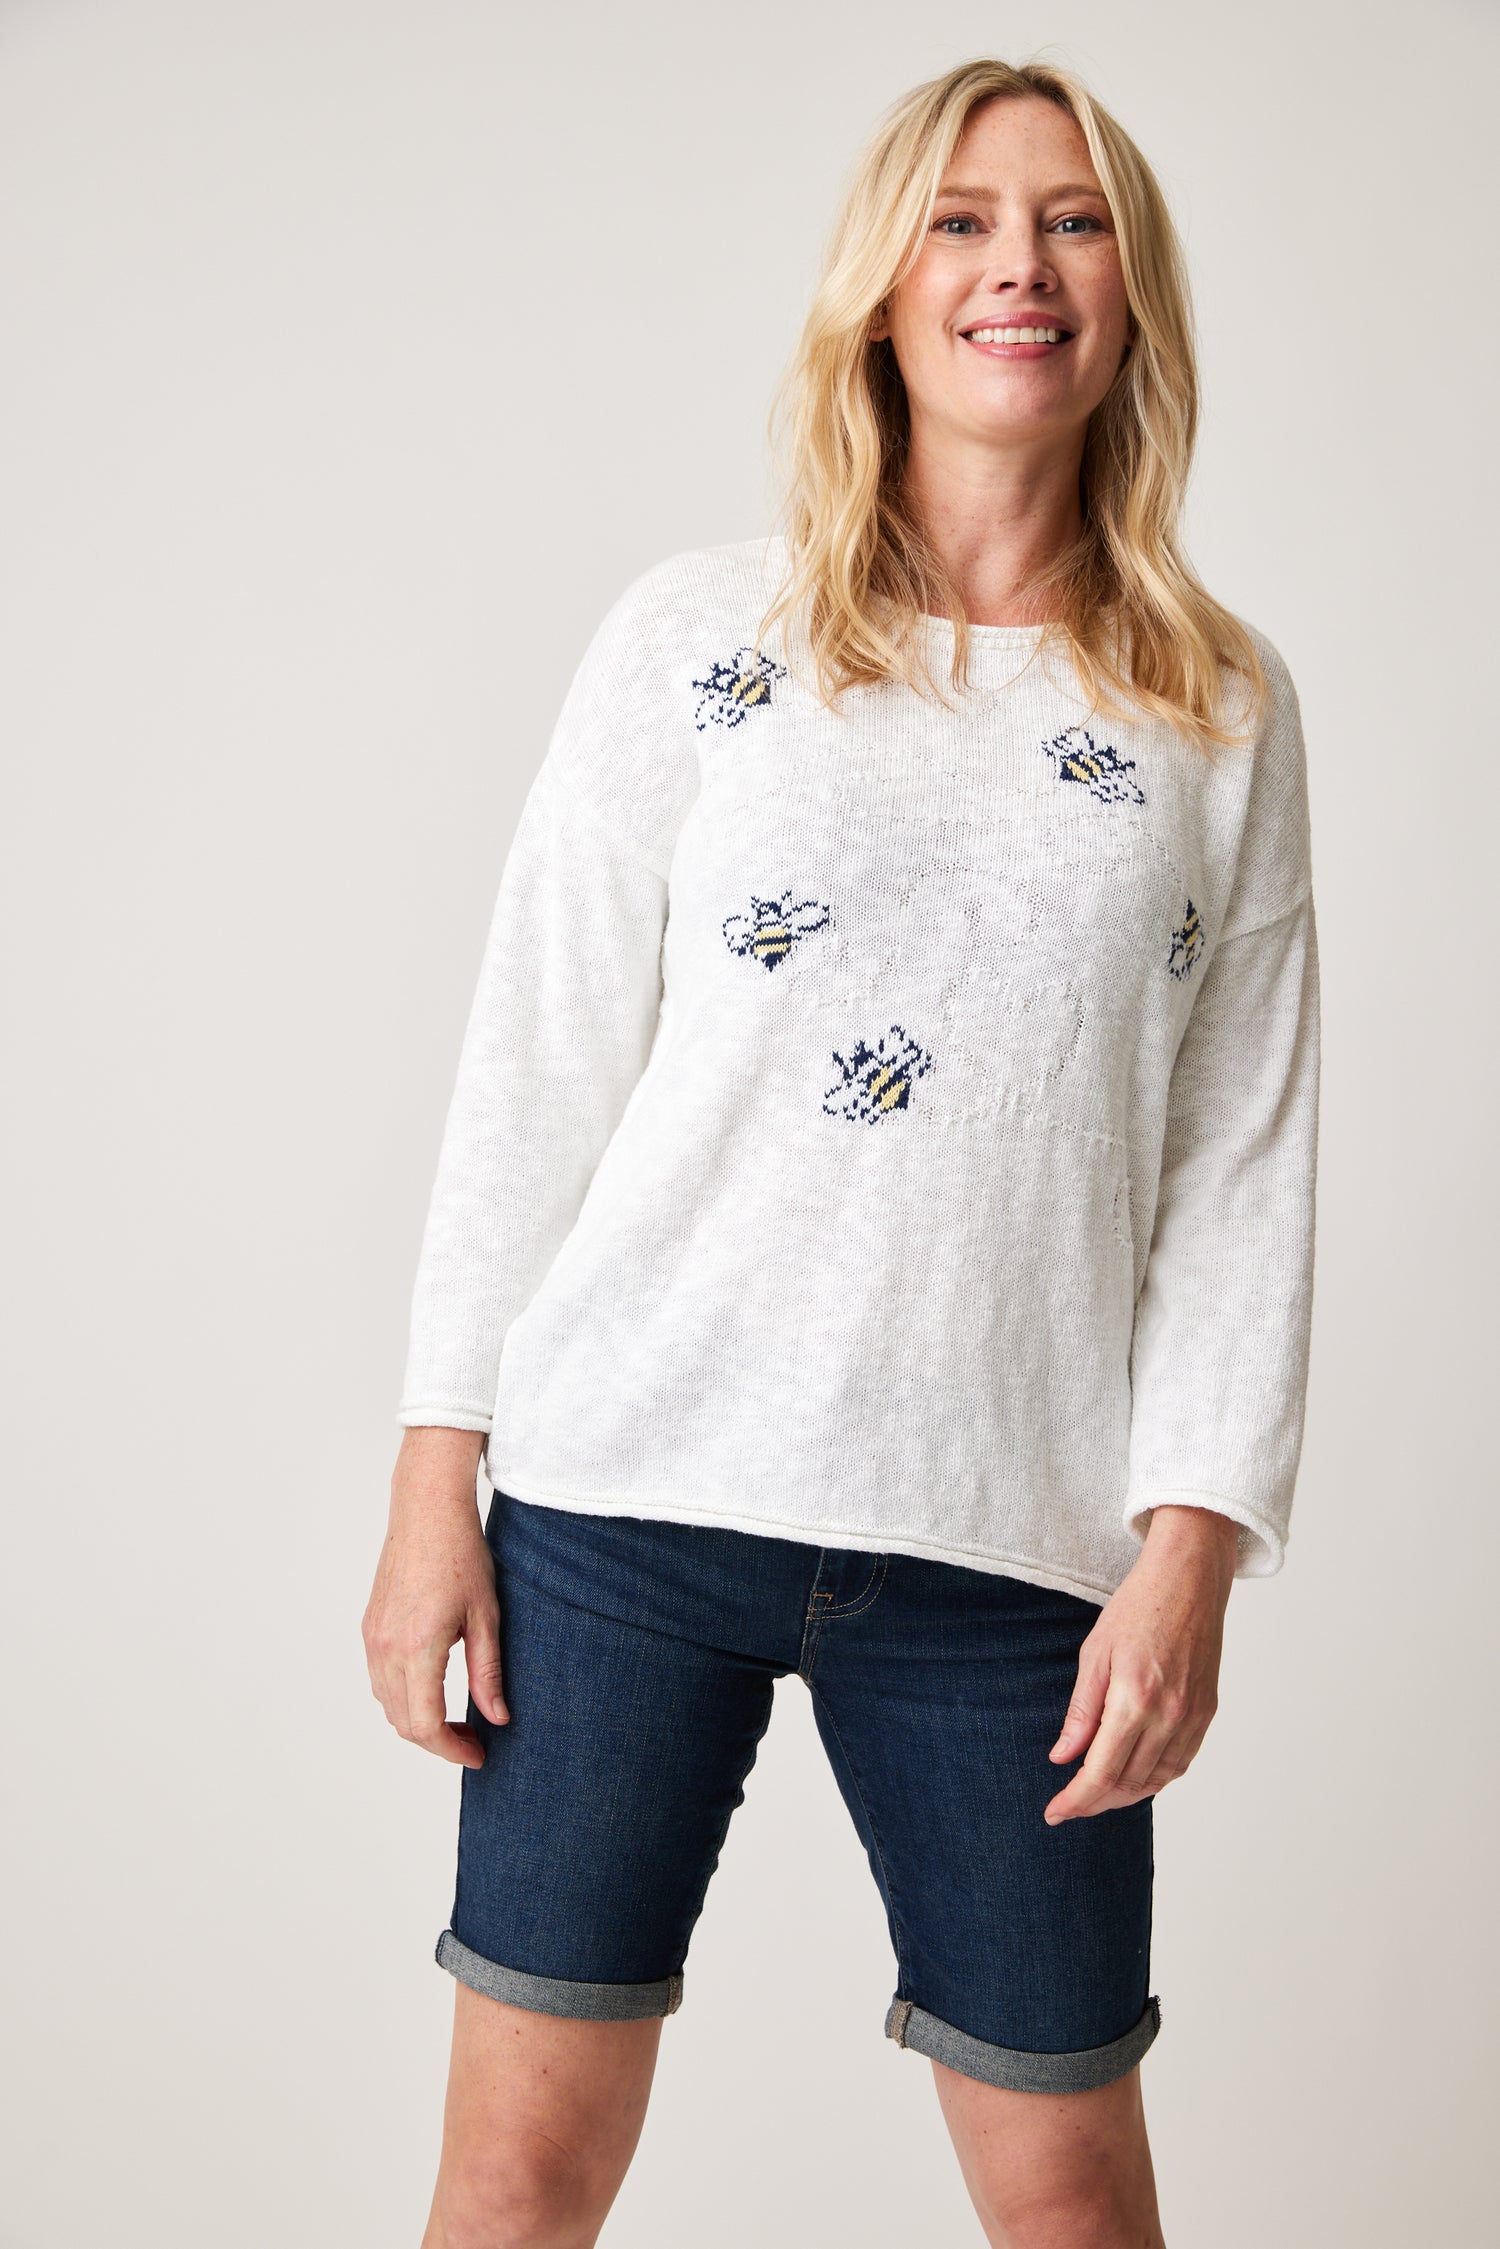 A woman wearing a Cotton Country Busy Bee Sweater and denim shorts.